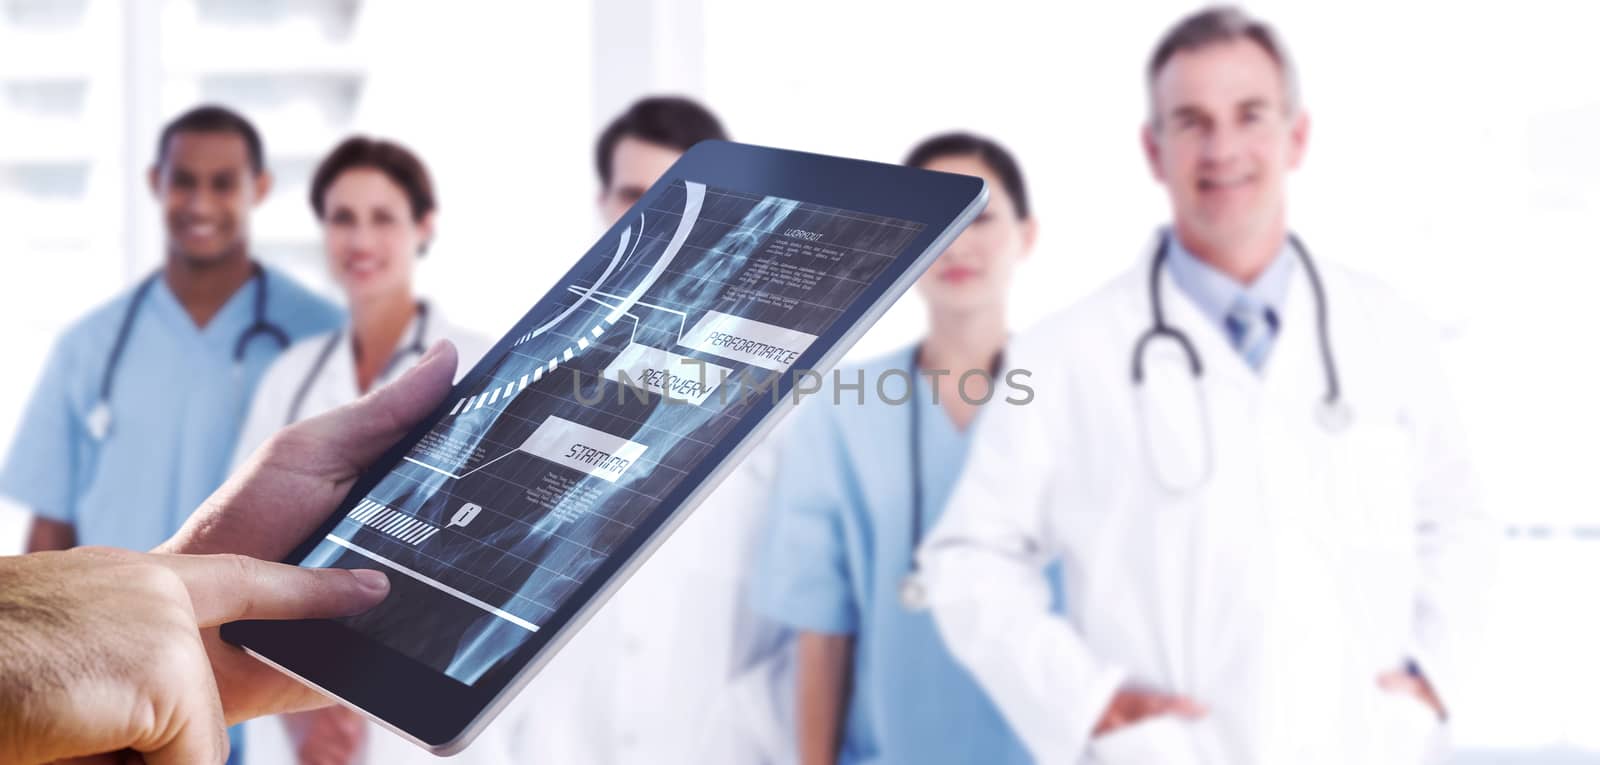 Man using tablet pc against portrait of doctors in a row at hospital